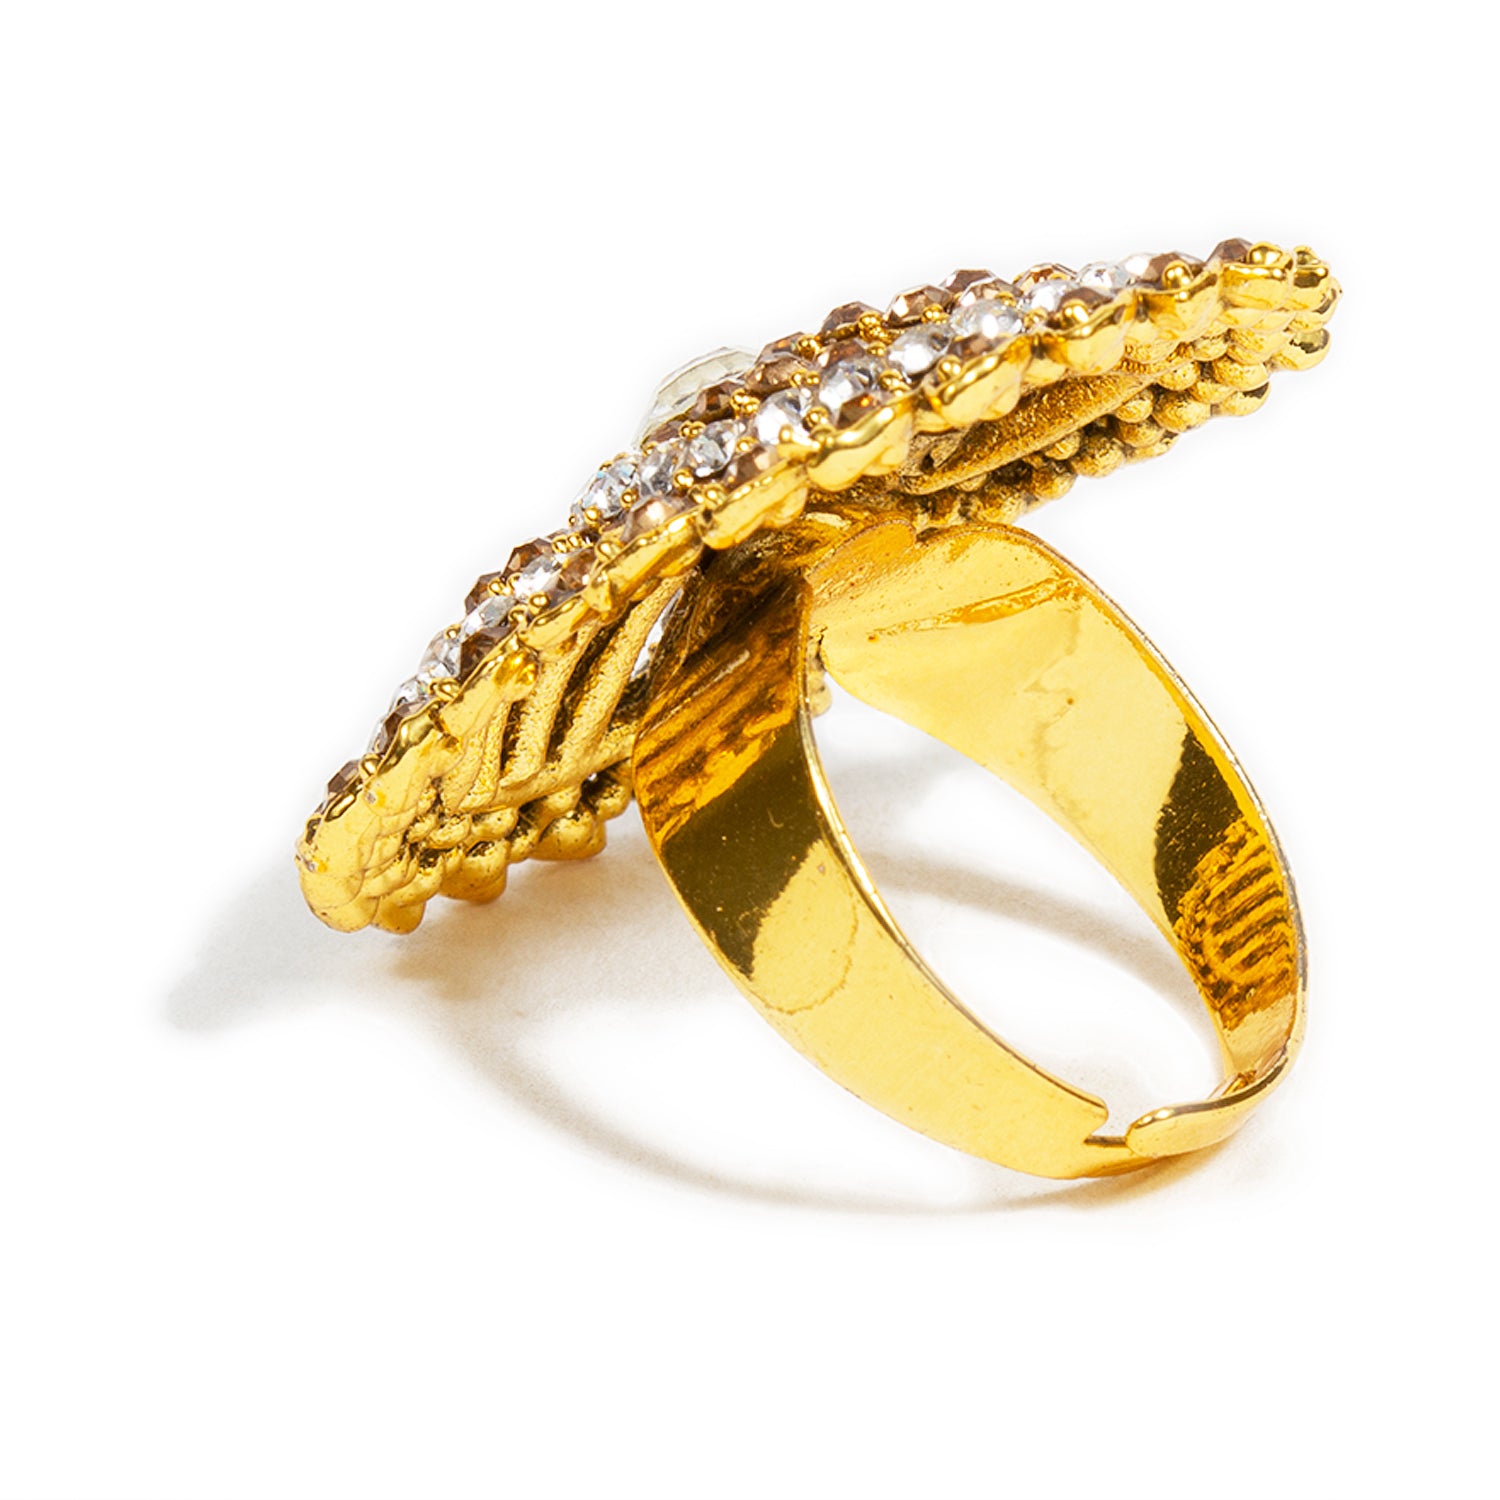 GOLD RINGS | TRIBAL ORNAMENTS